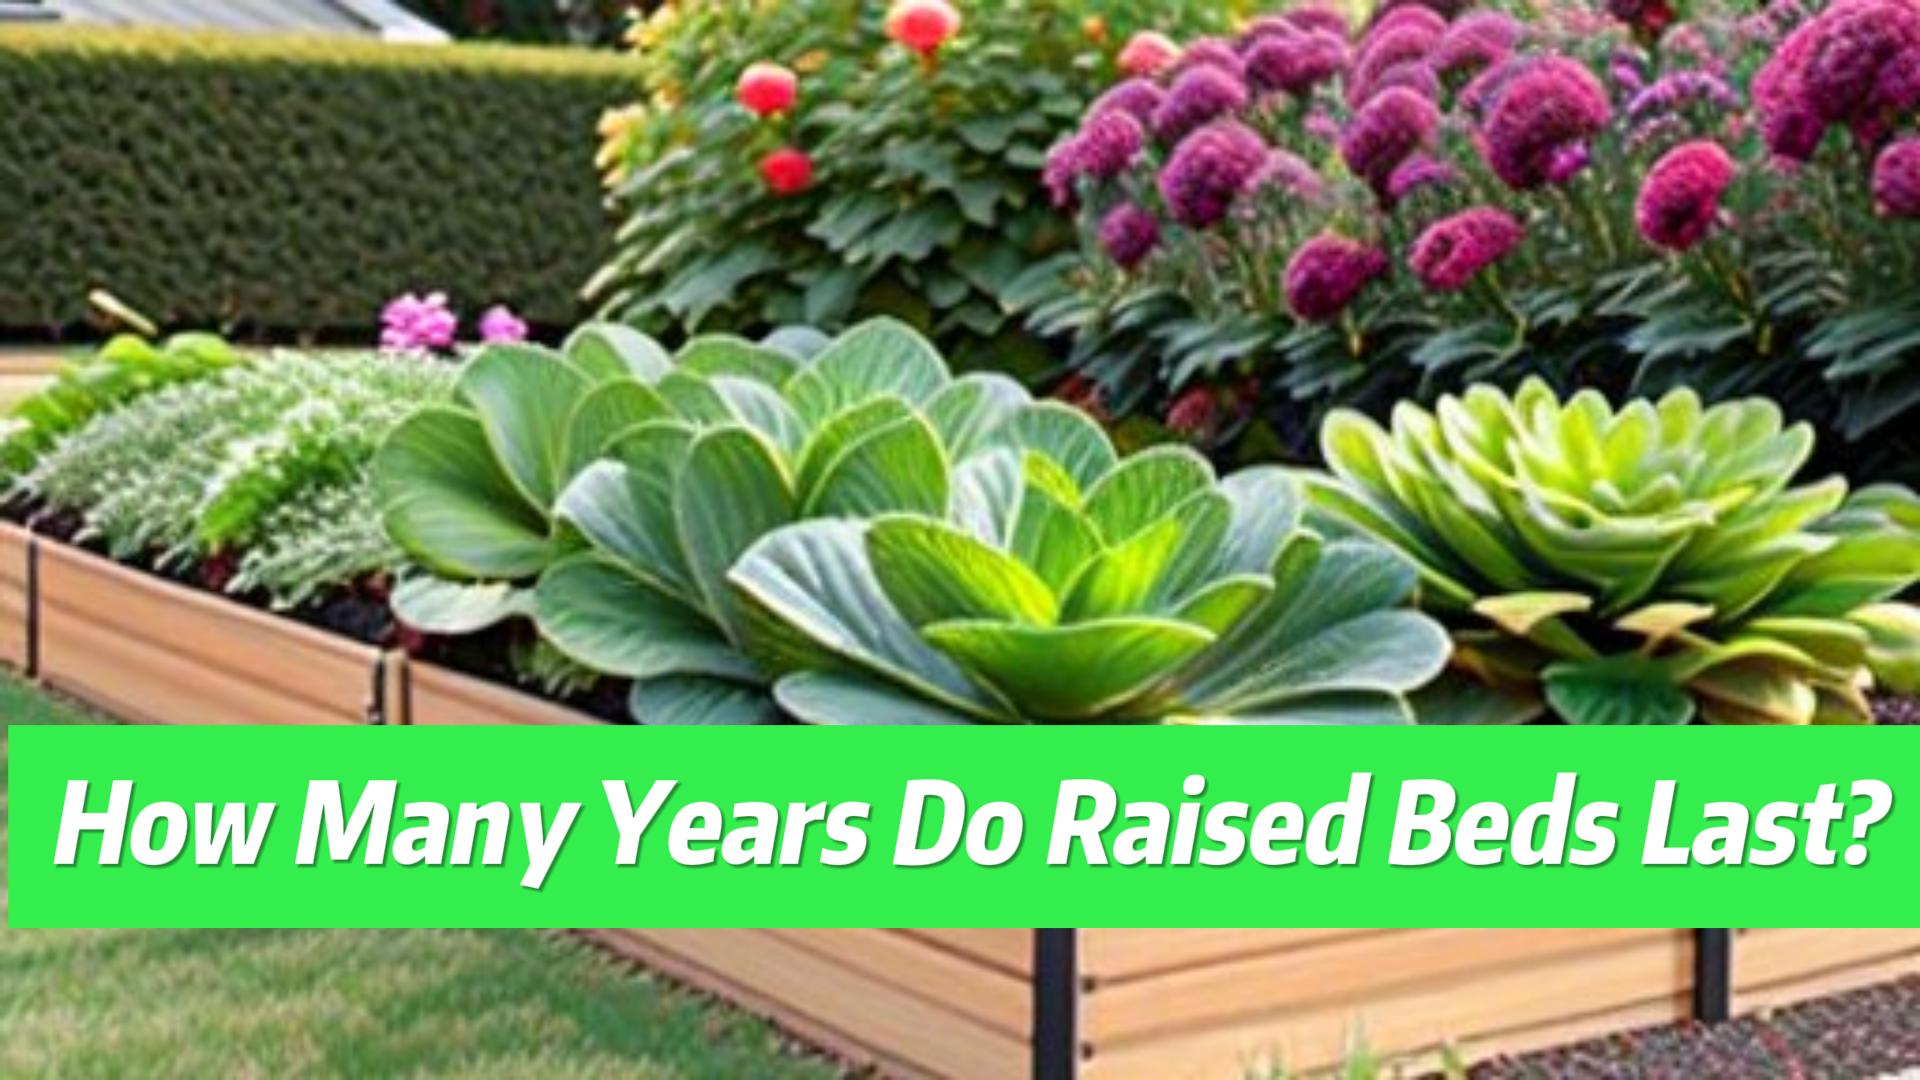 How many years do raised beds last?